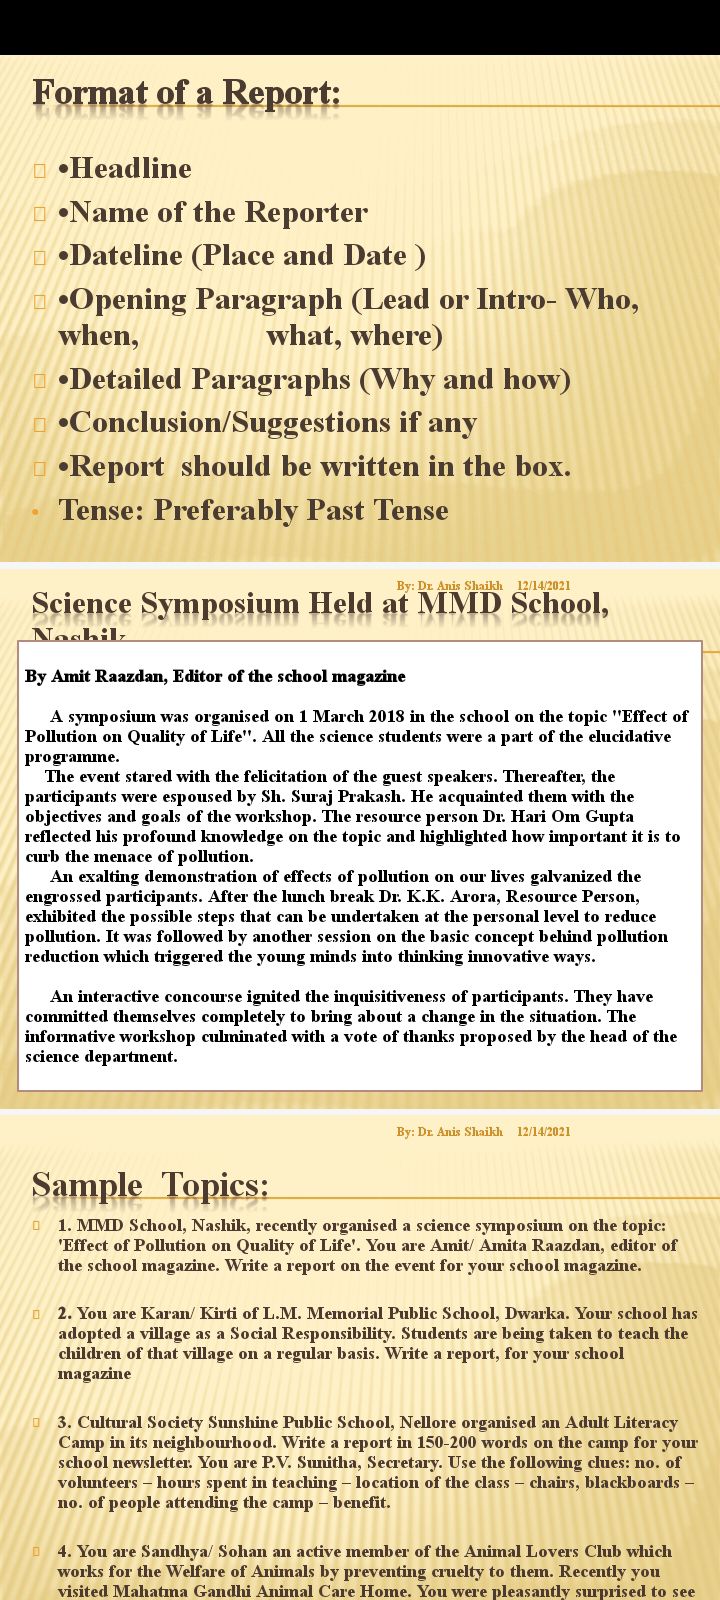 How to Write a Scientific Report | Step-by-Step Guide